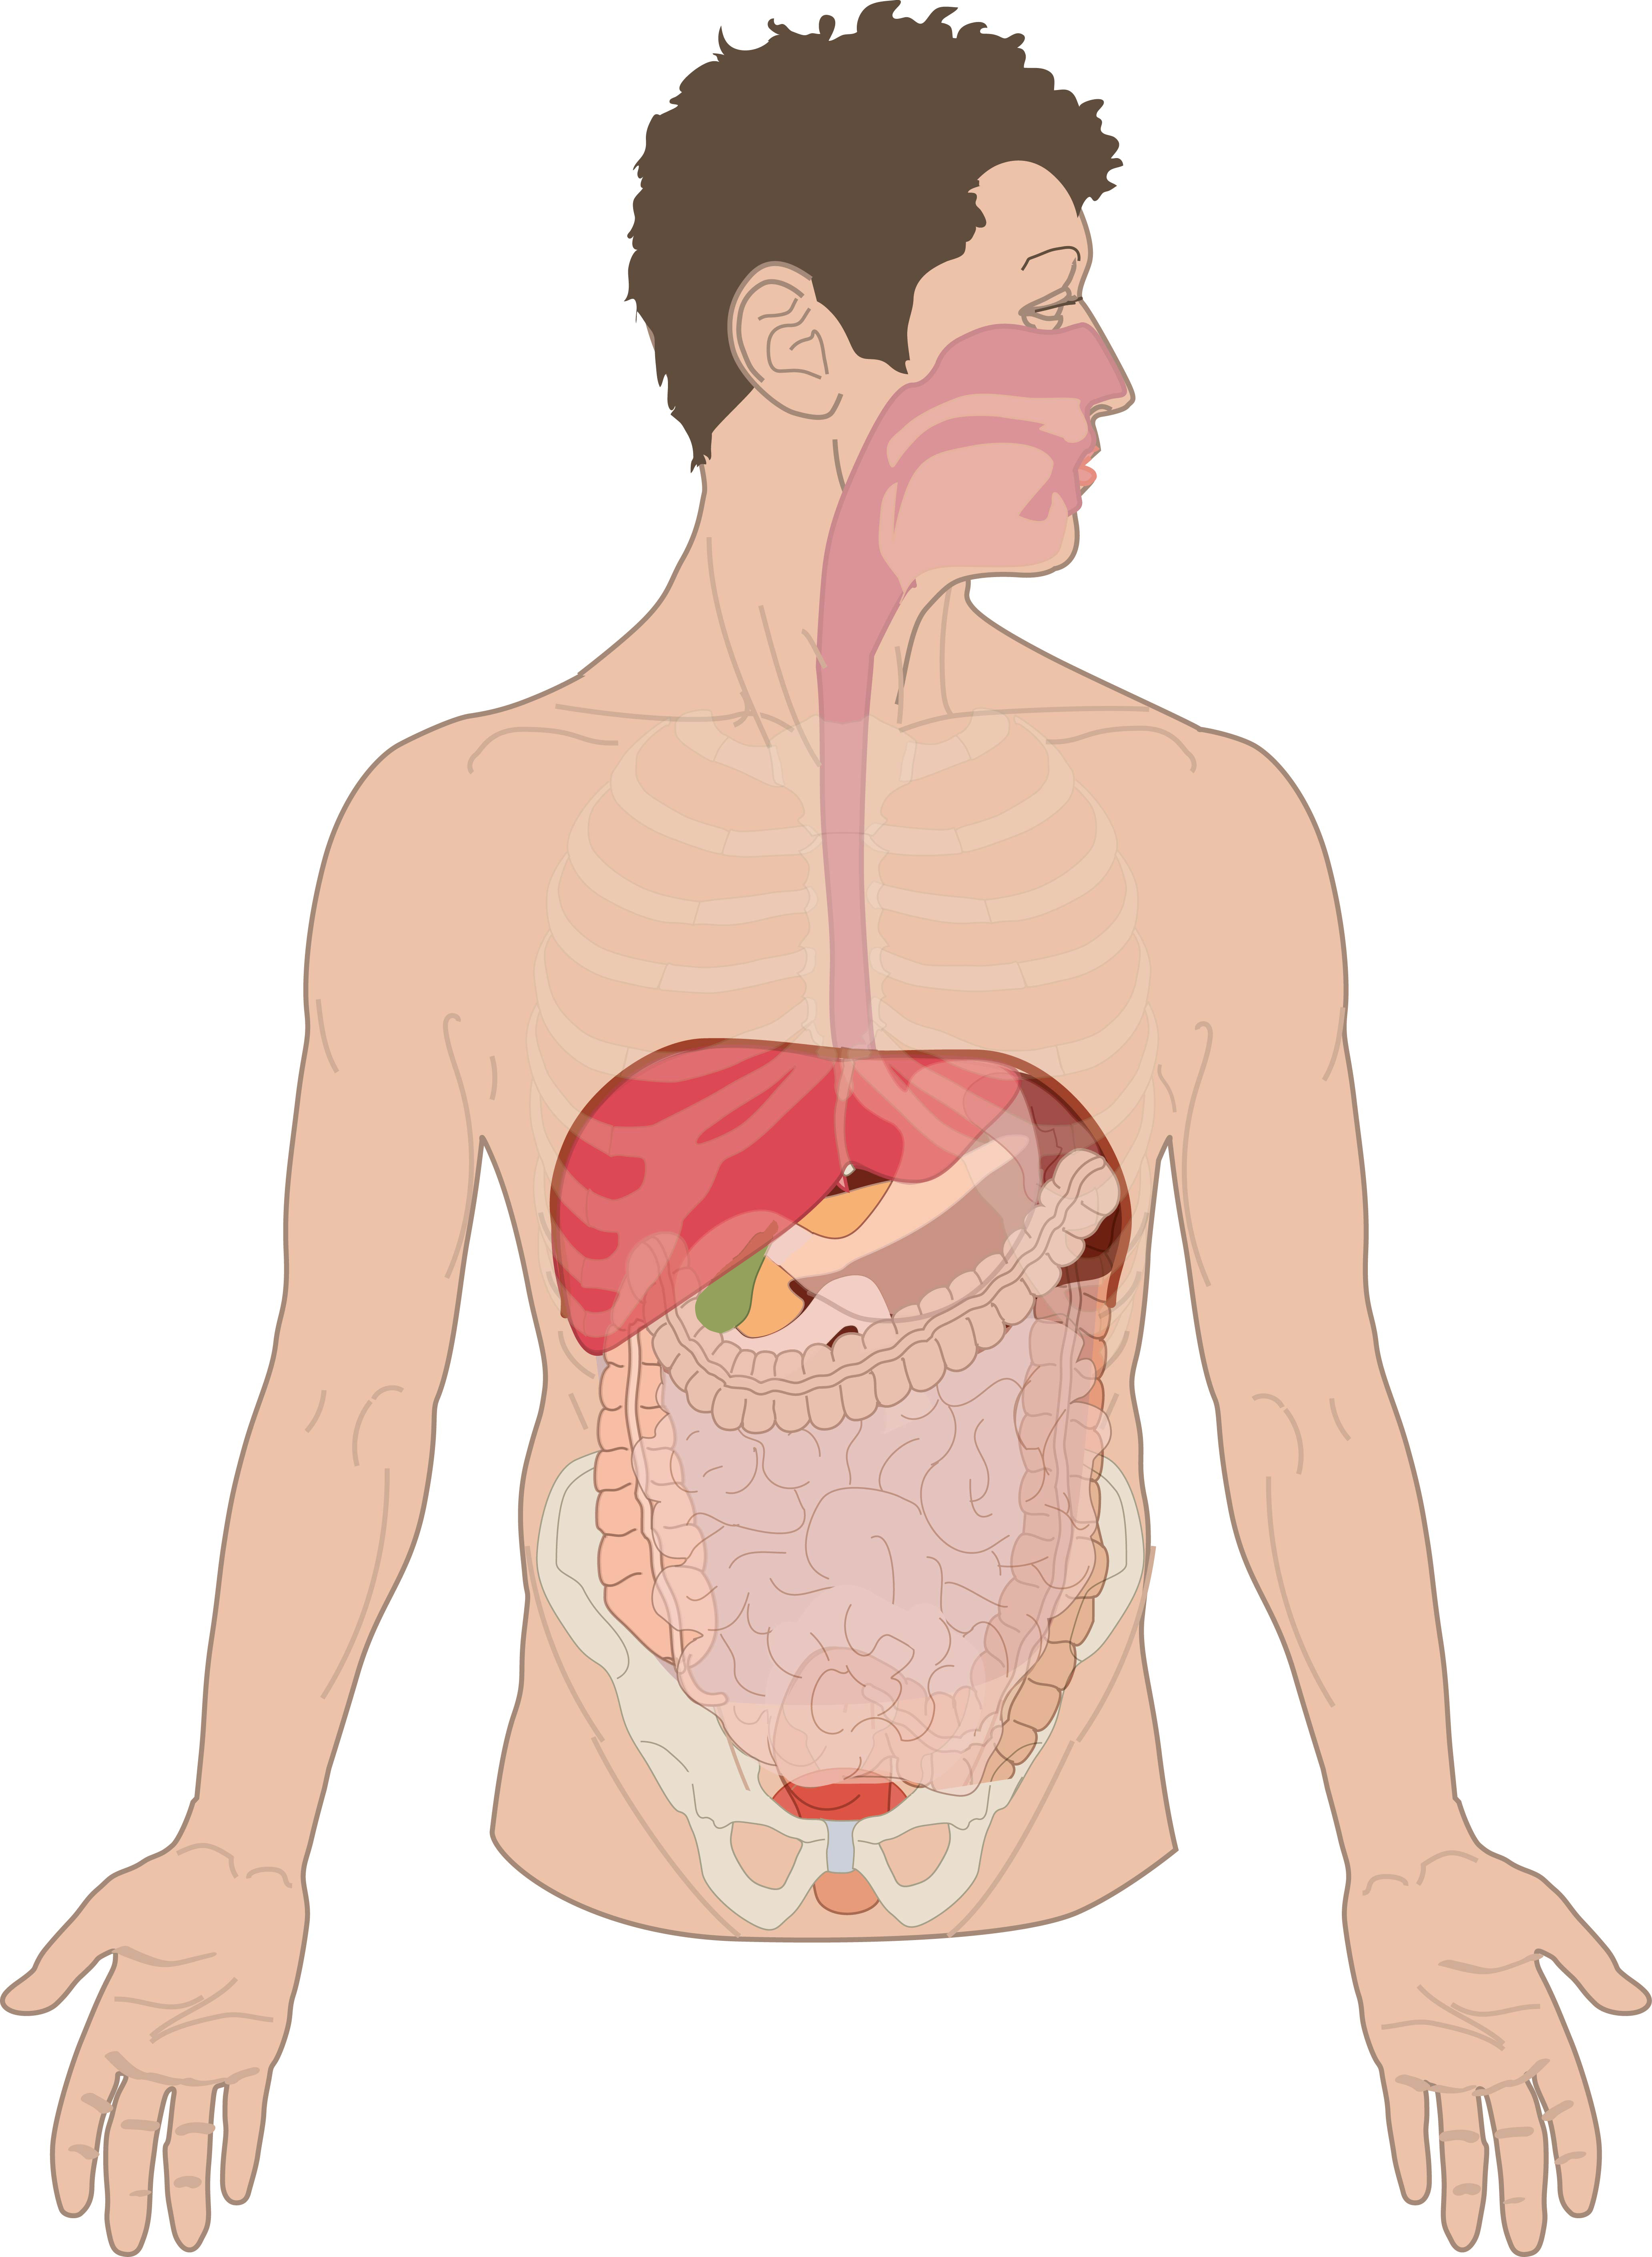 Human Digestive System Labelled: Over 1,537 Royalty-Free Licensable Stock  Illustrations & Drawings | Shutterstock